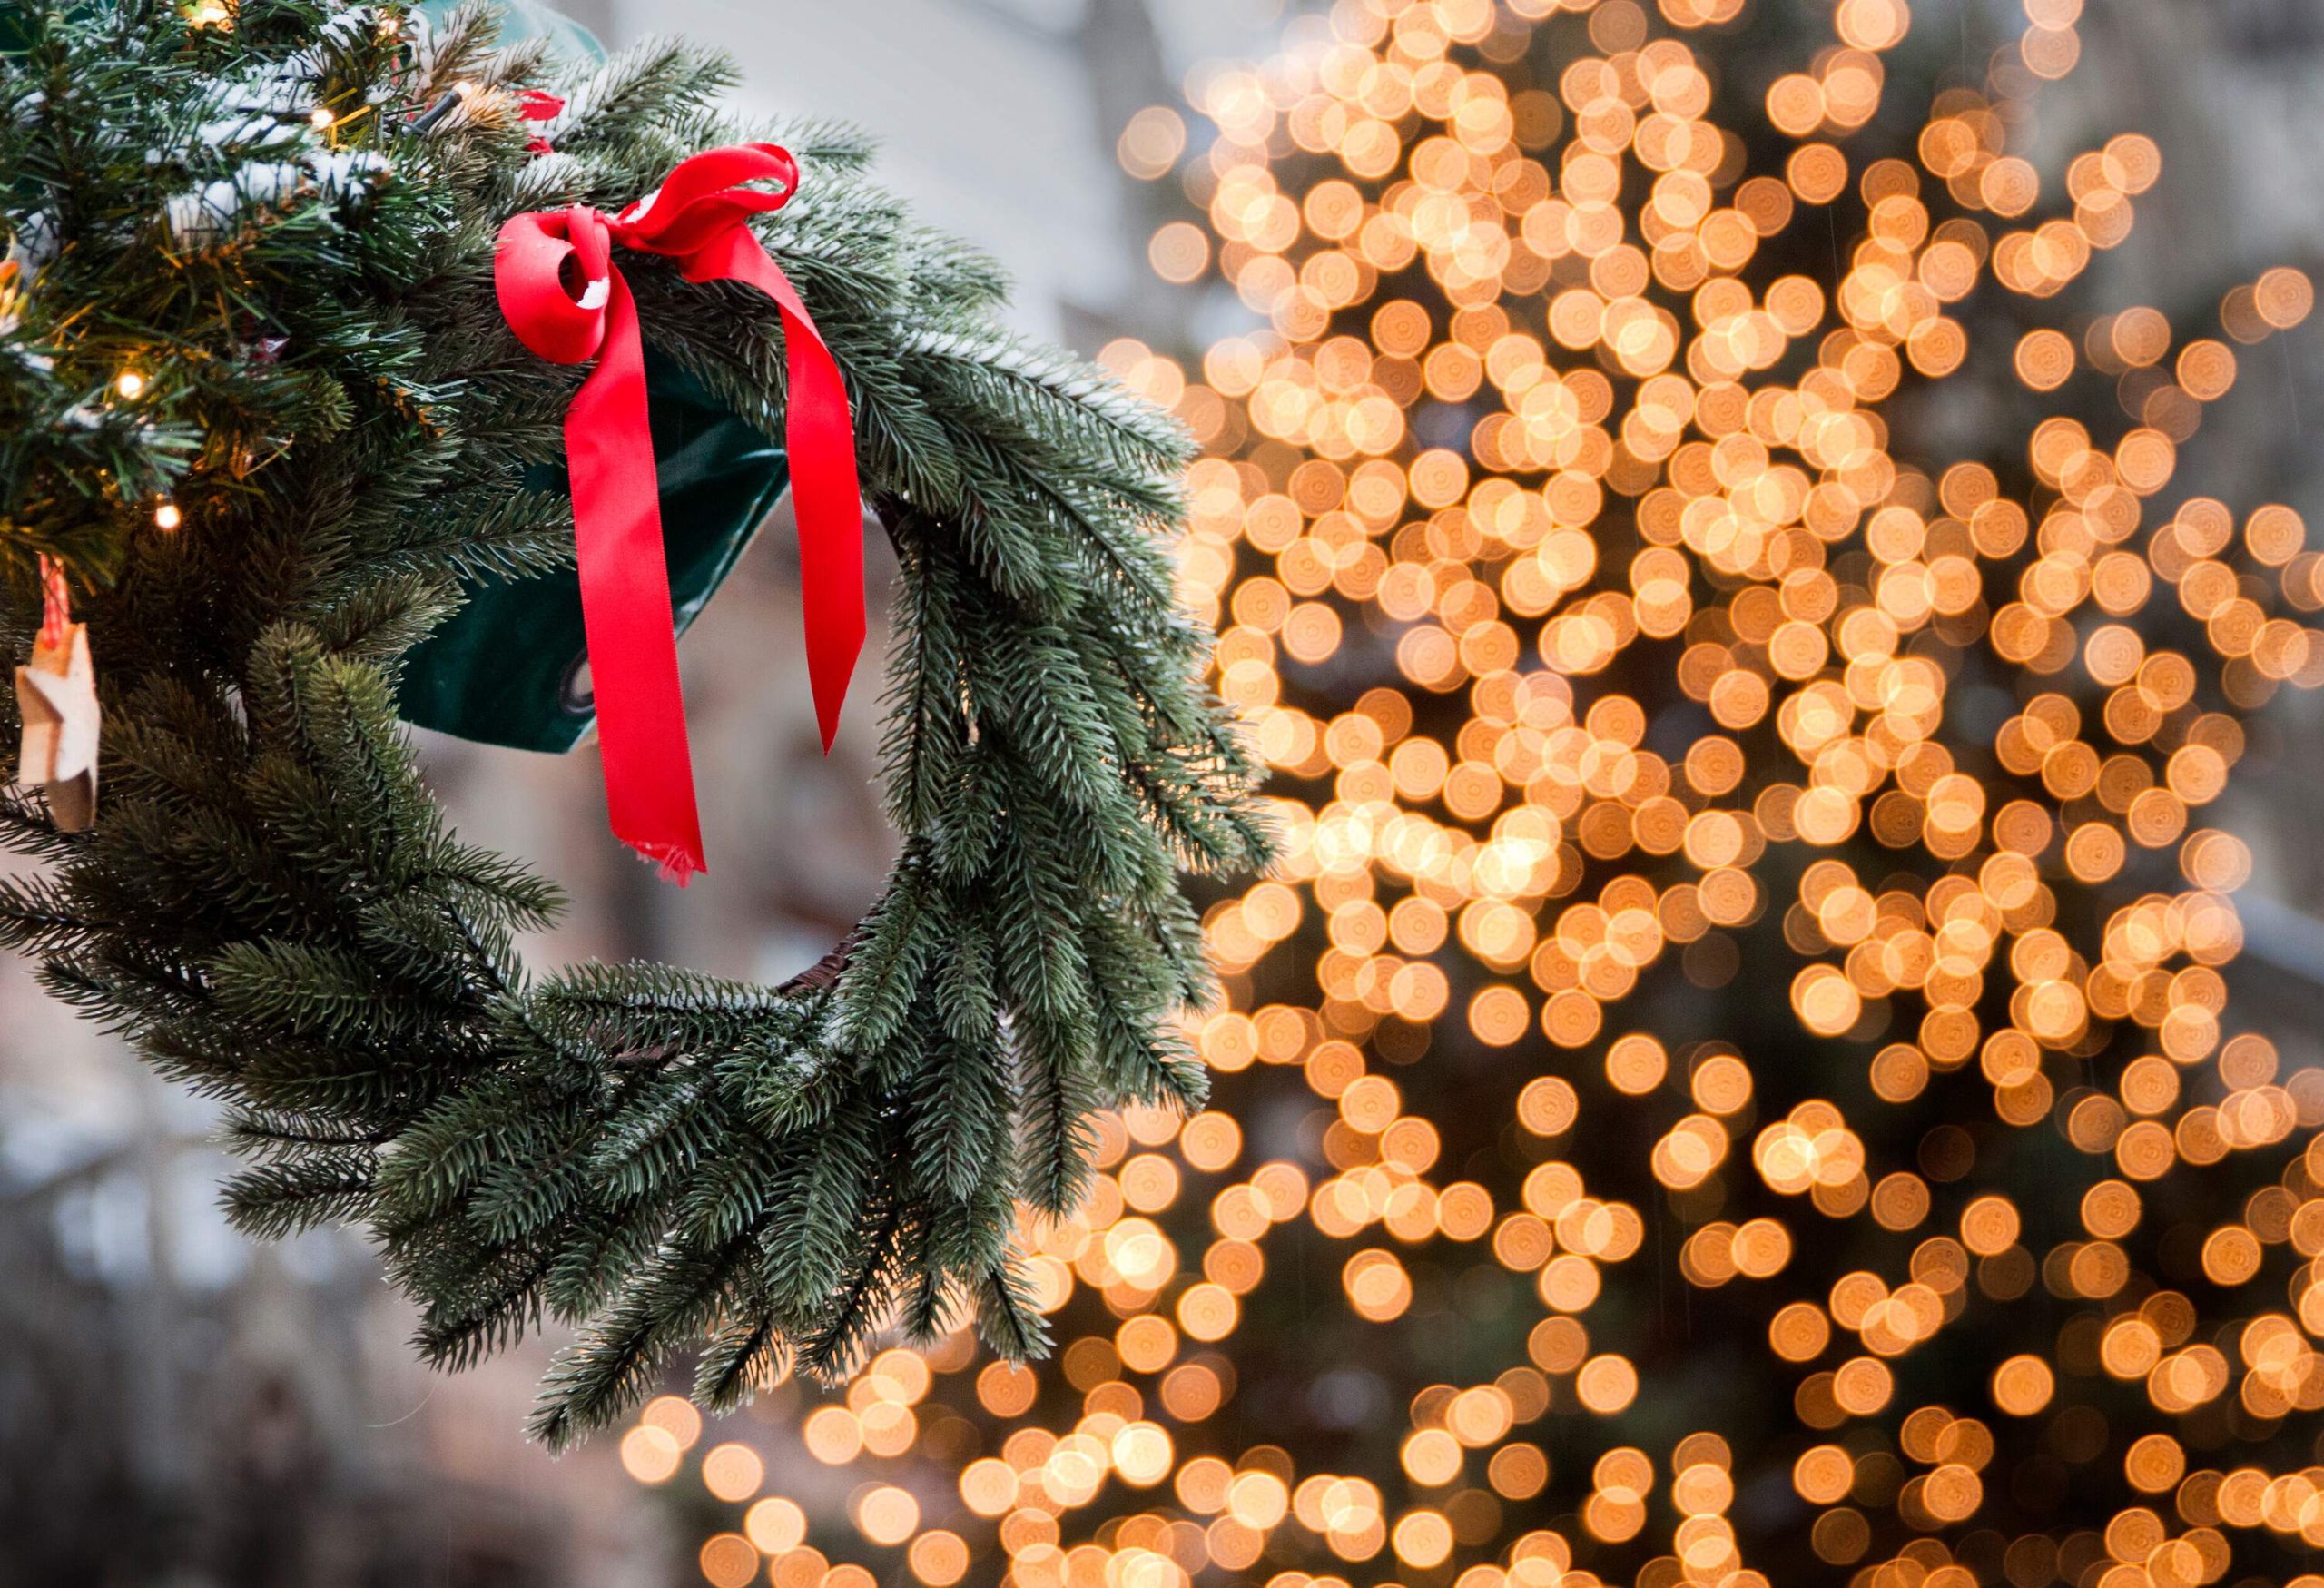 A festive decoration against a blurred series of lights.